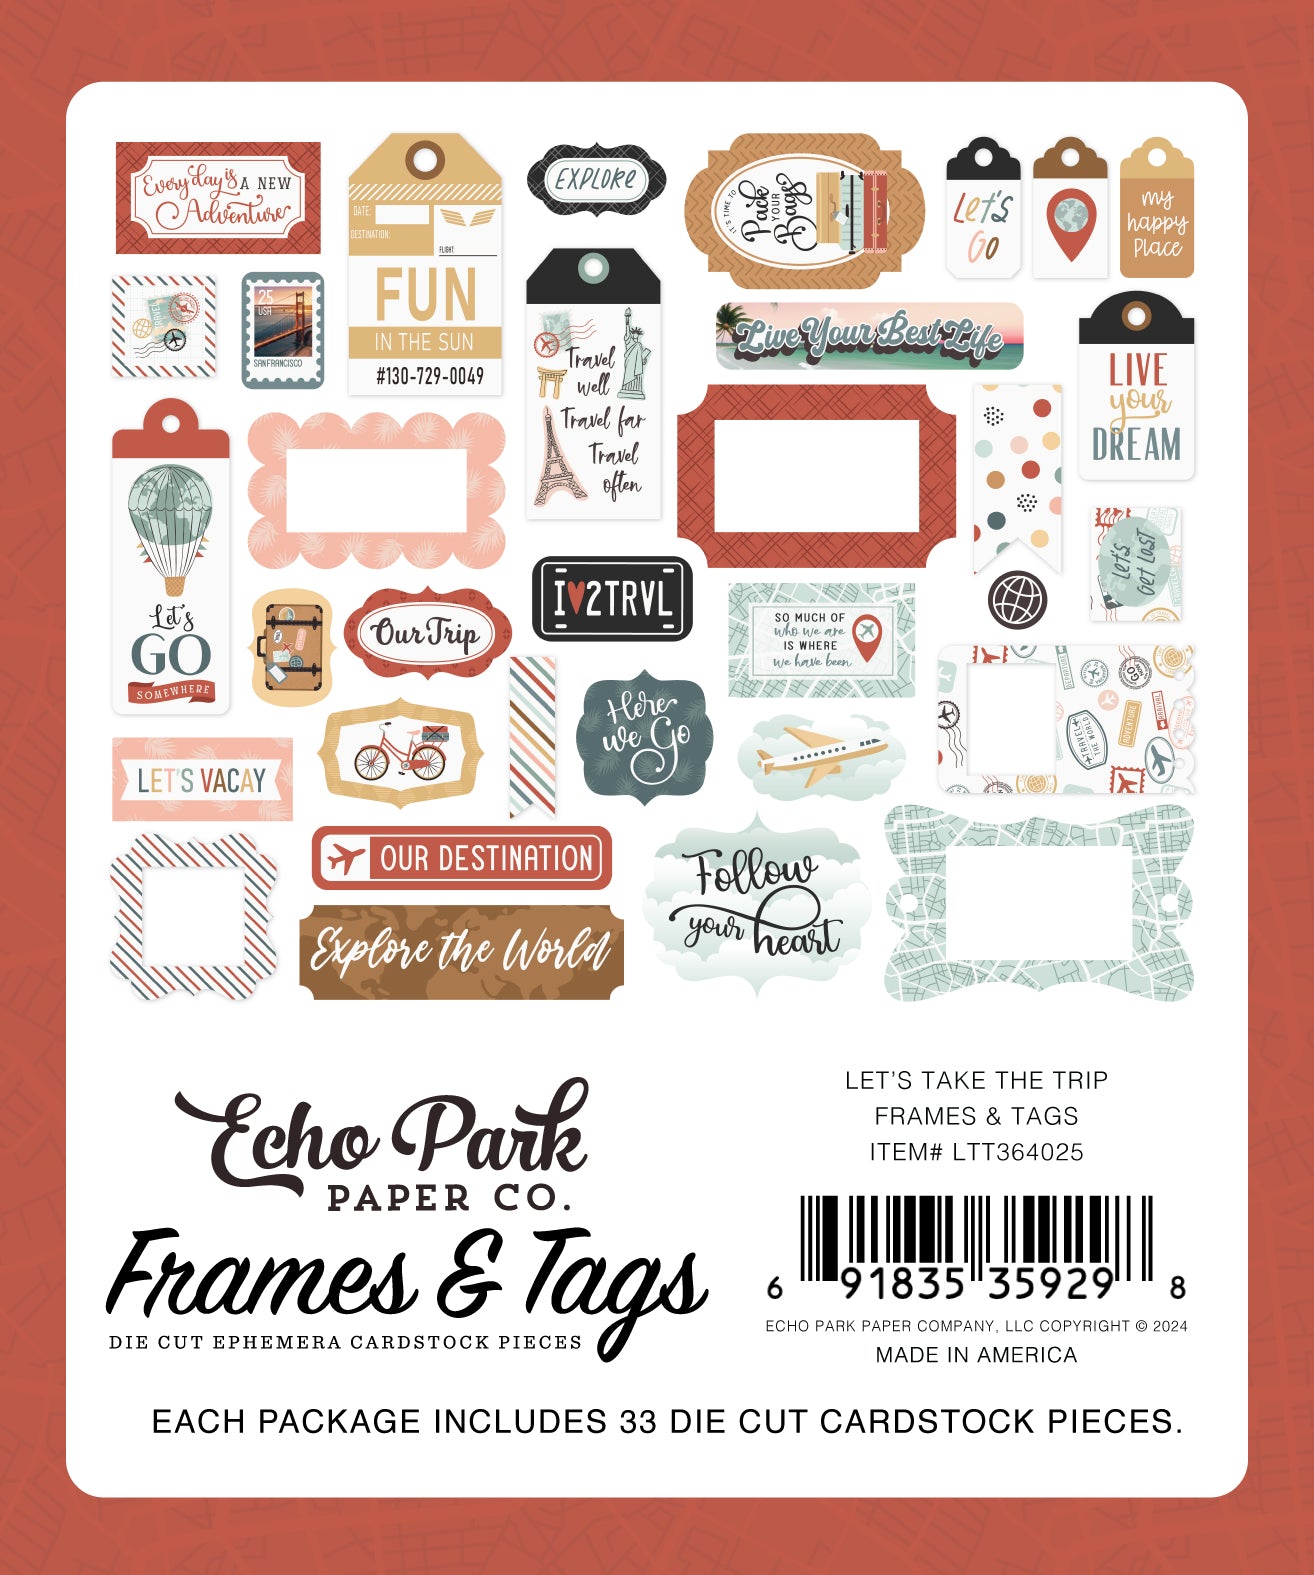 Let's Take the Trip Collection 5x5 Scrapbook Frames & Tags by Echo Park Paper